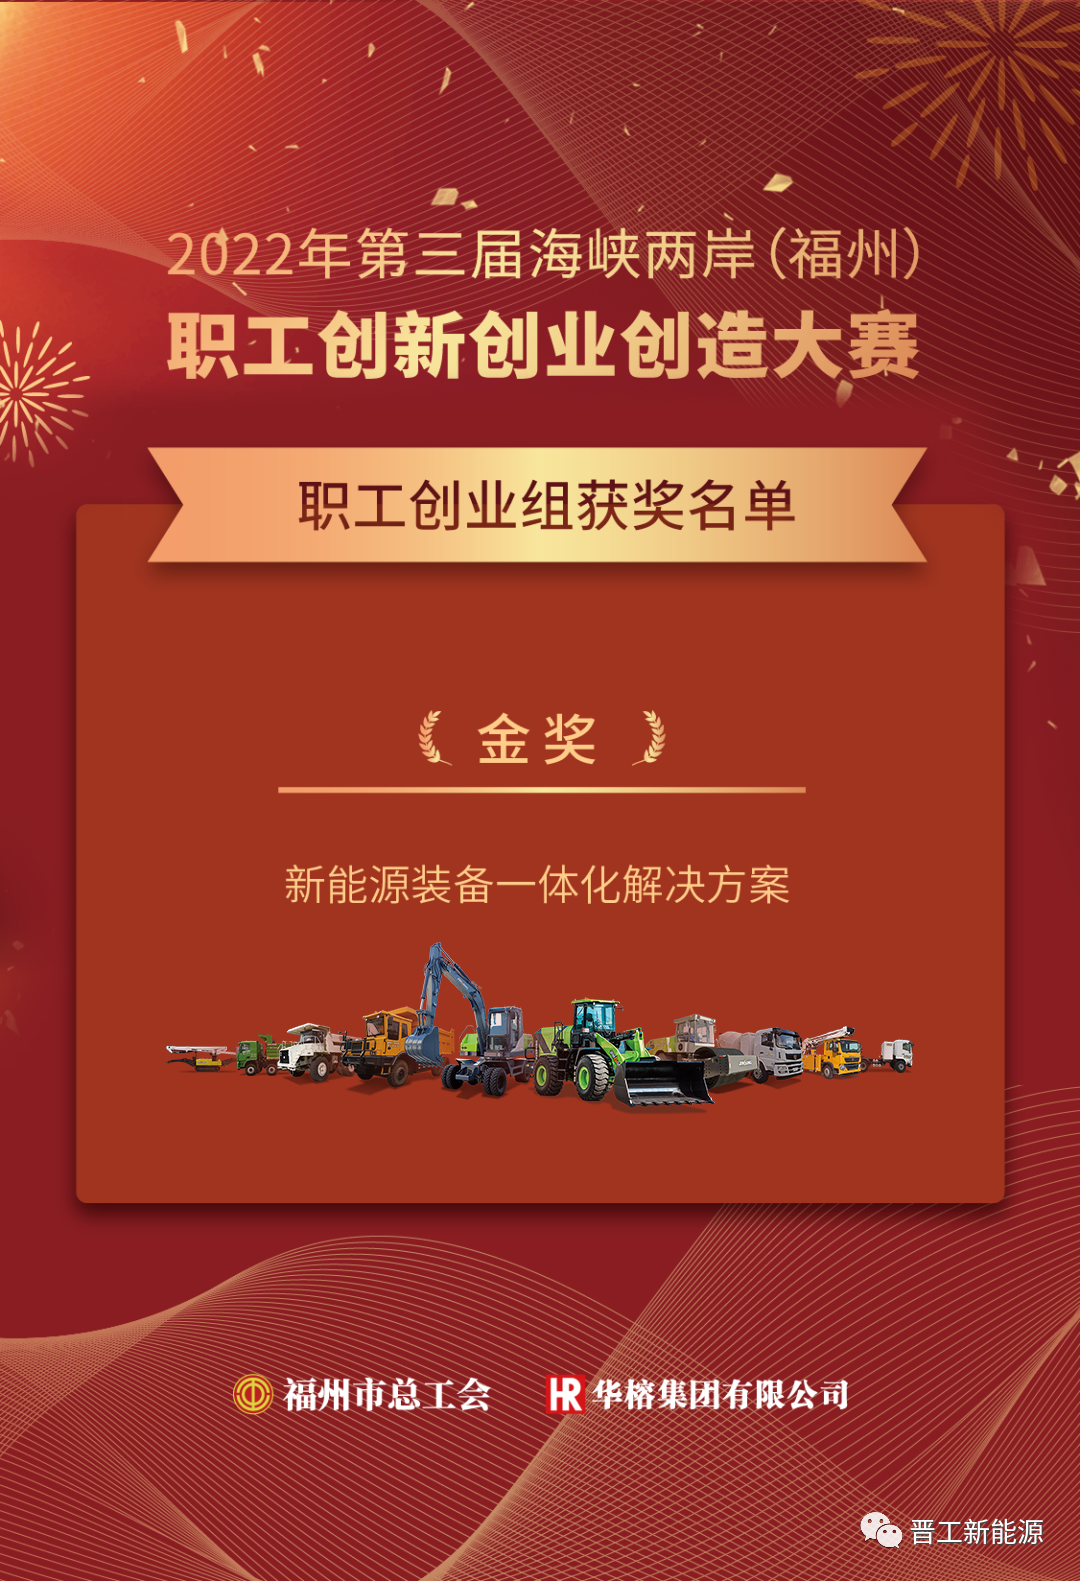 "Jingong New Energy Equipment Integration Solution" won the Gold Prize of the Third Cross-Strait Workers'Innovation and Entrepreneurship Competition!